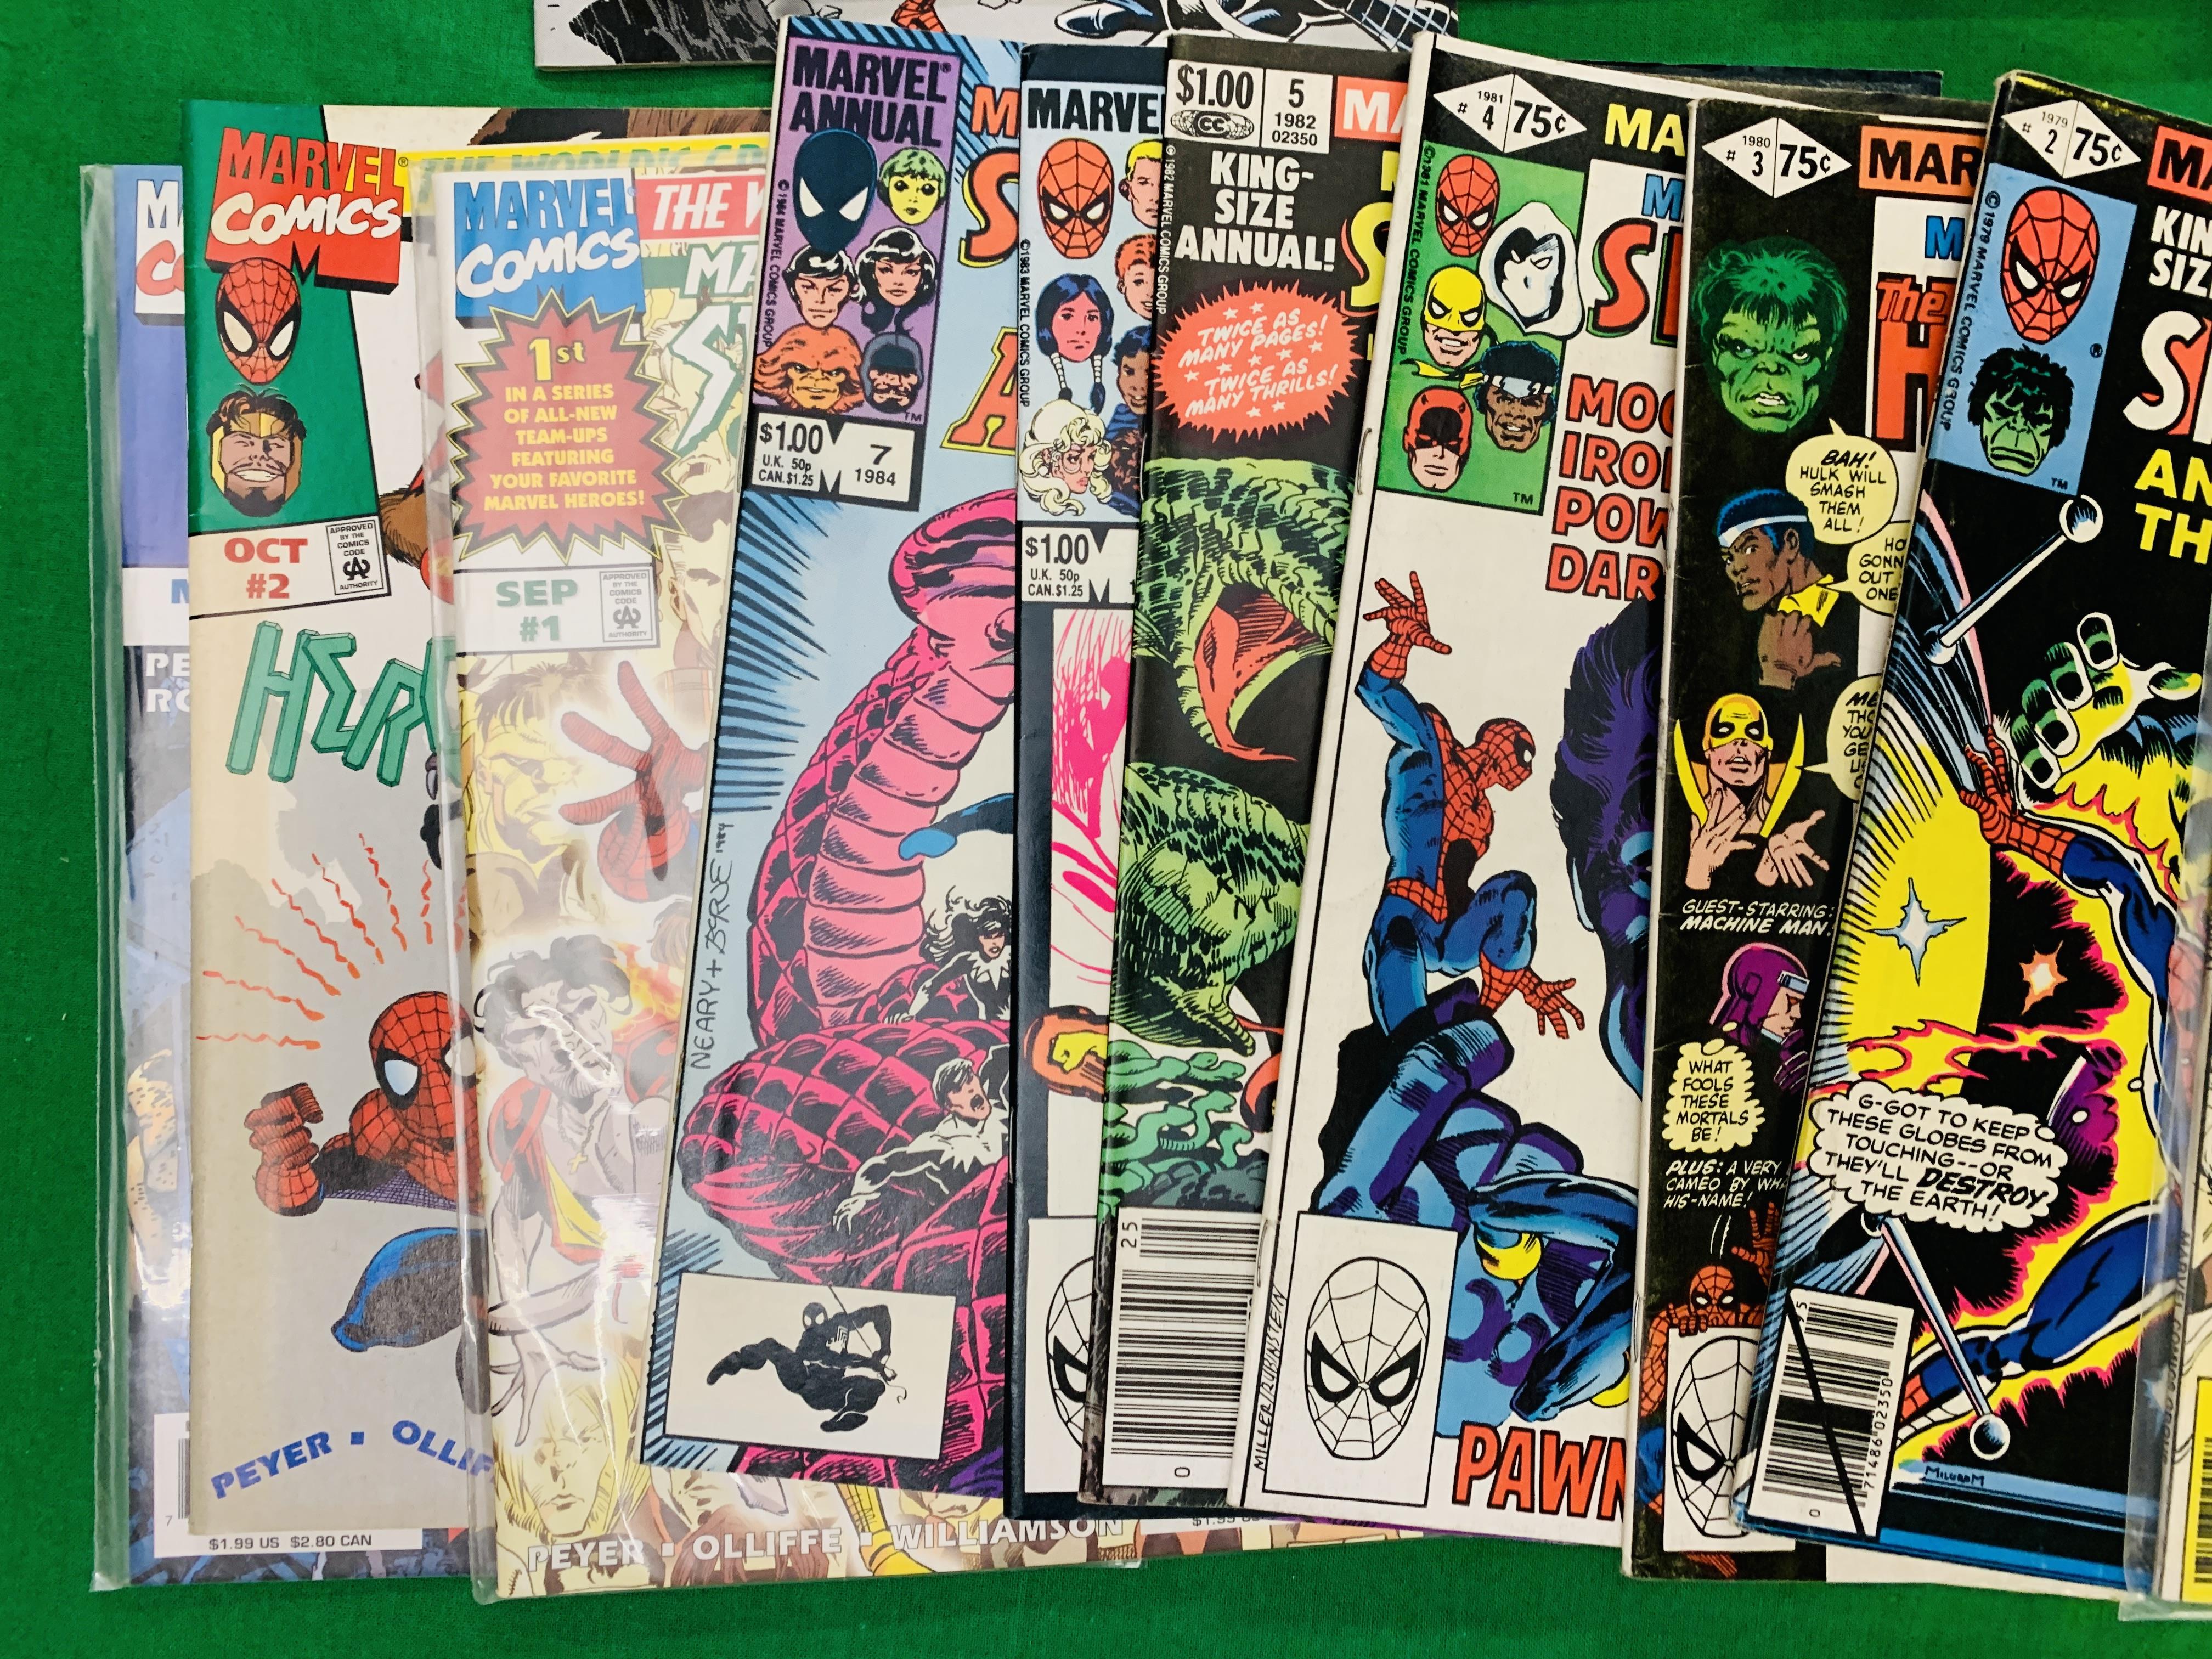 MARVEL TEAM UP KING SIZE ANNUALS NO. 1 - 7 FROM 1976. - Image 3 of 5